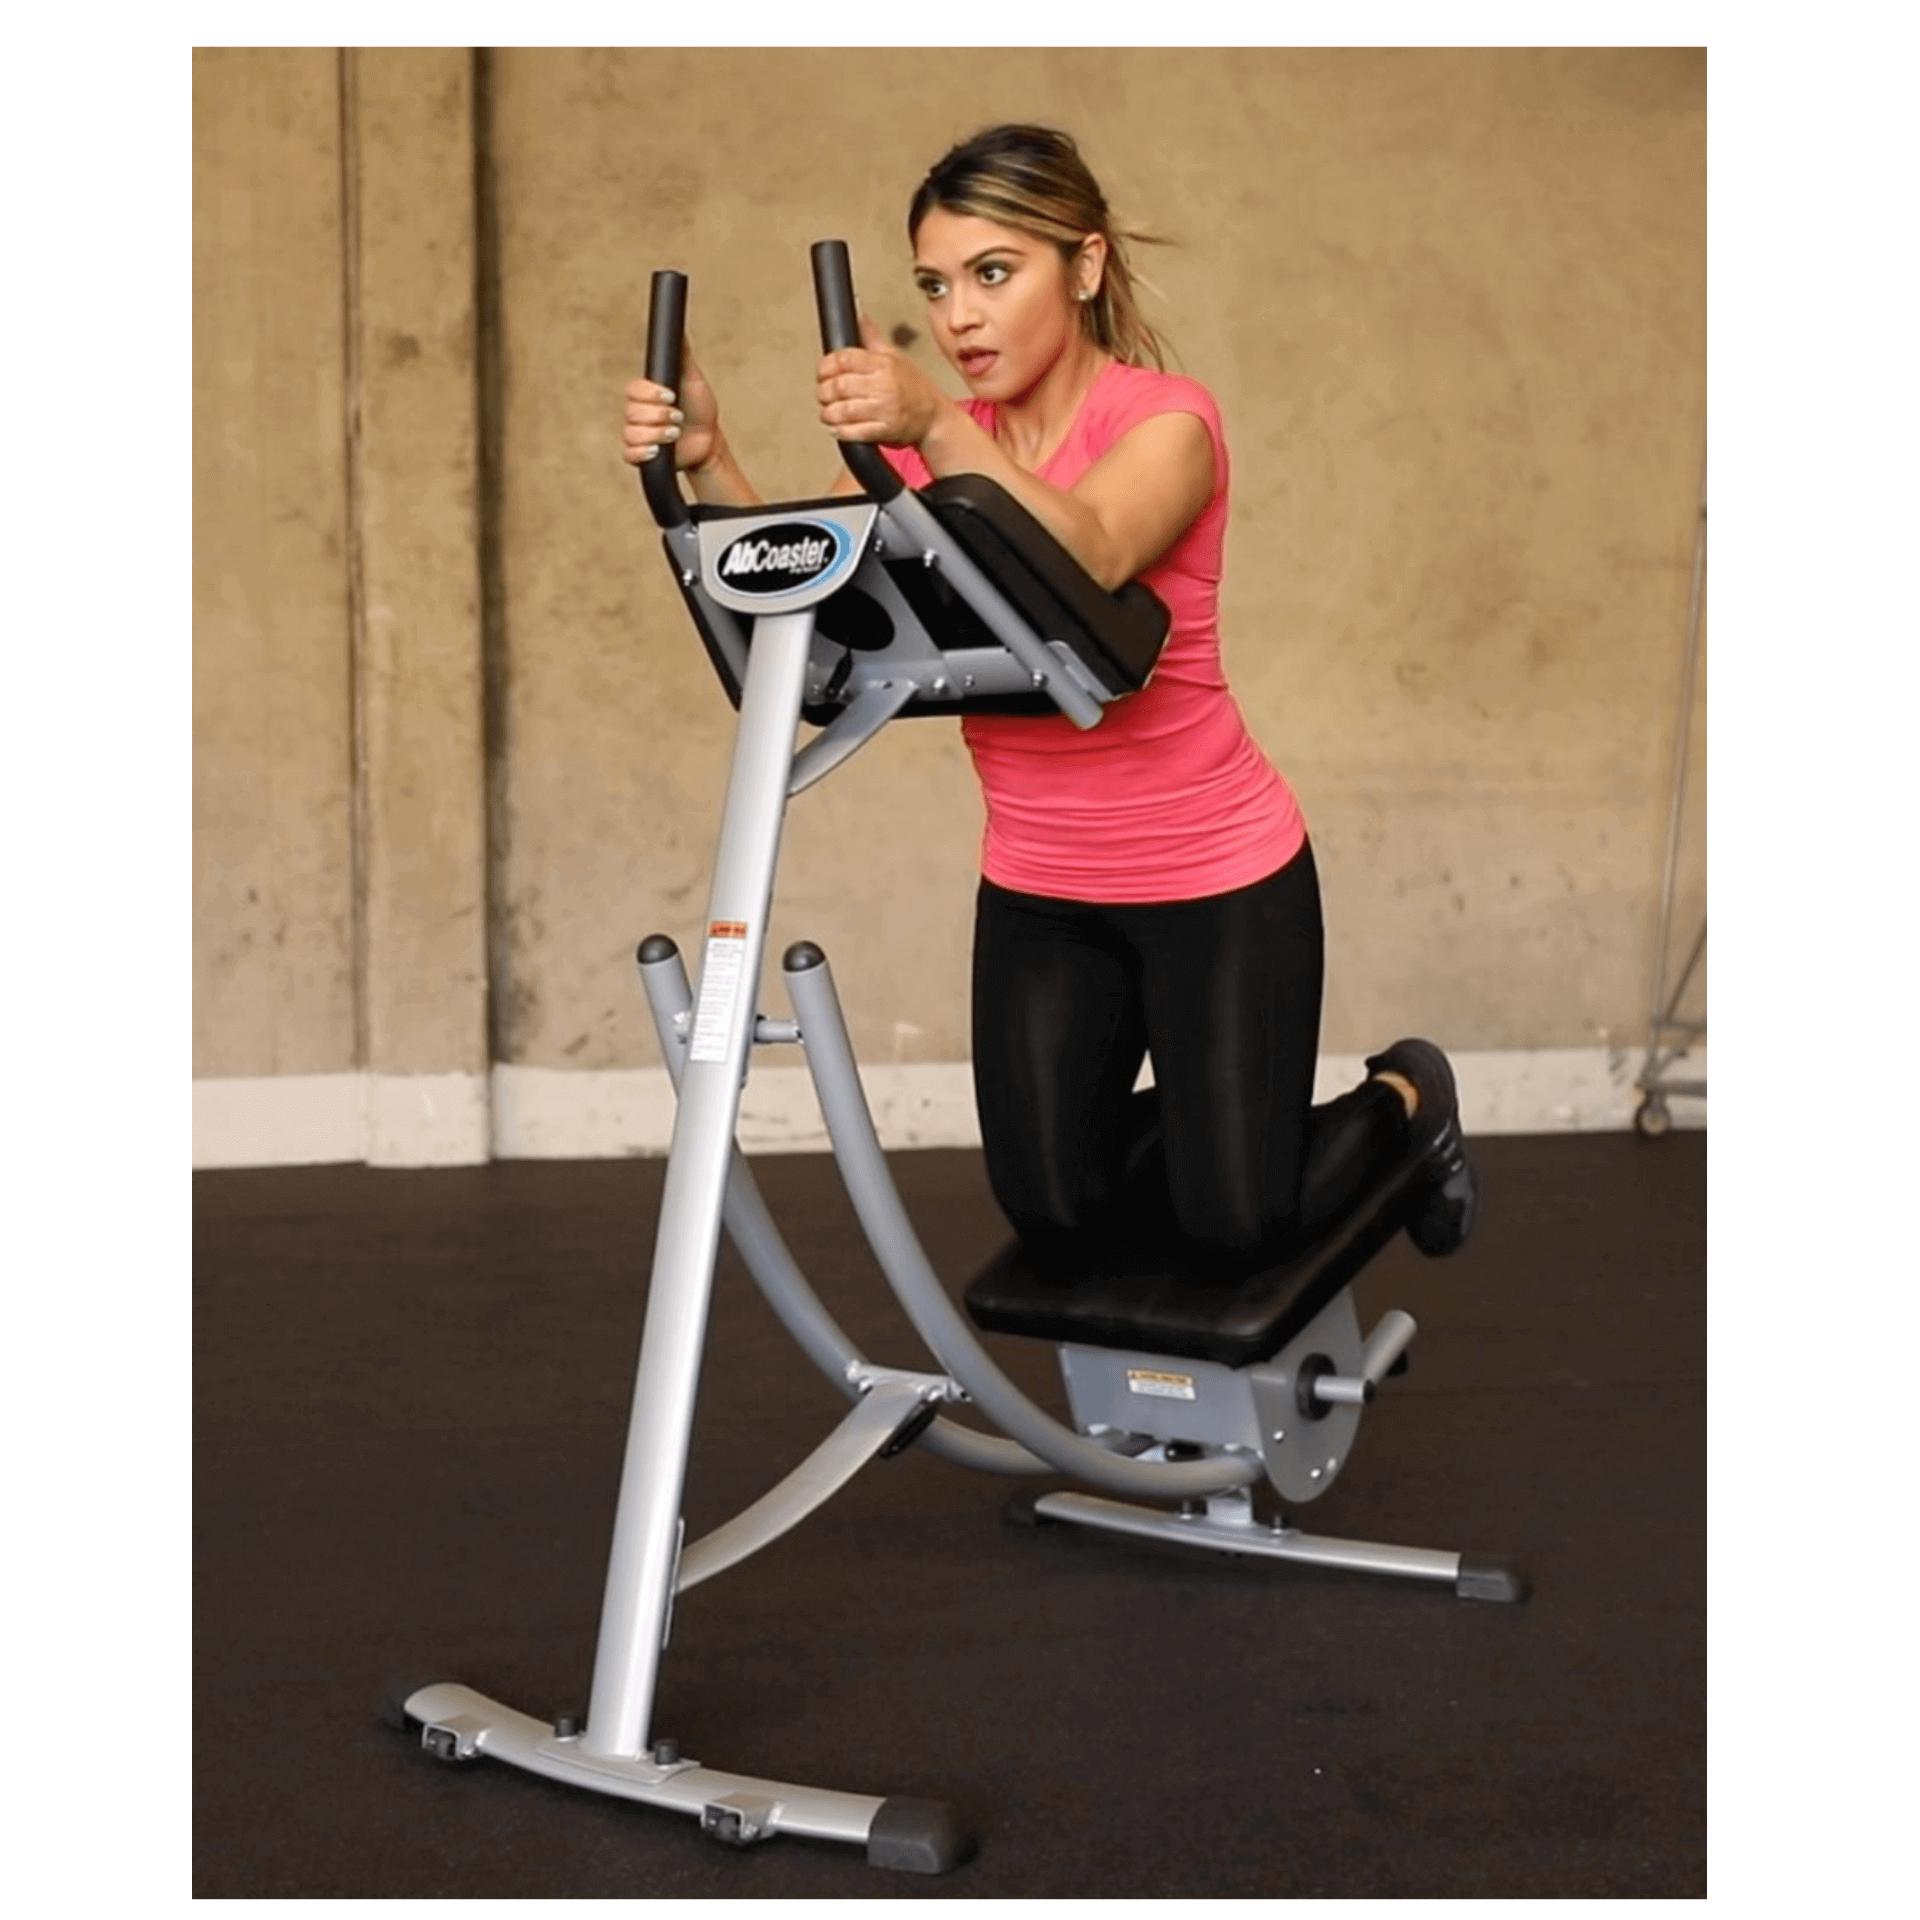 The Abs Company AB Coaster PS500 female model exercising